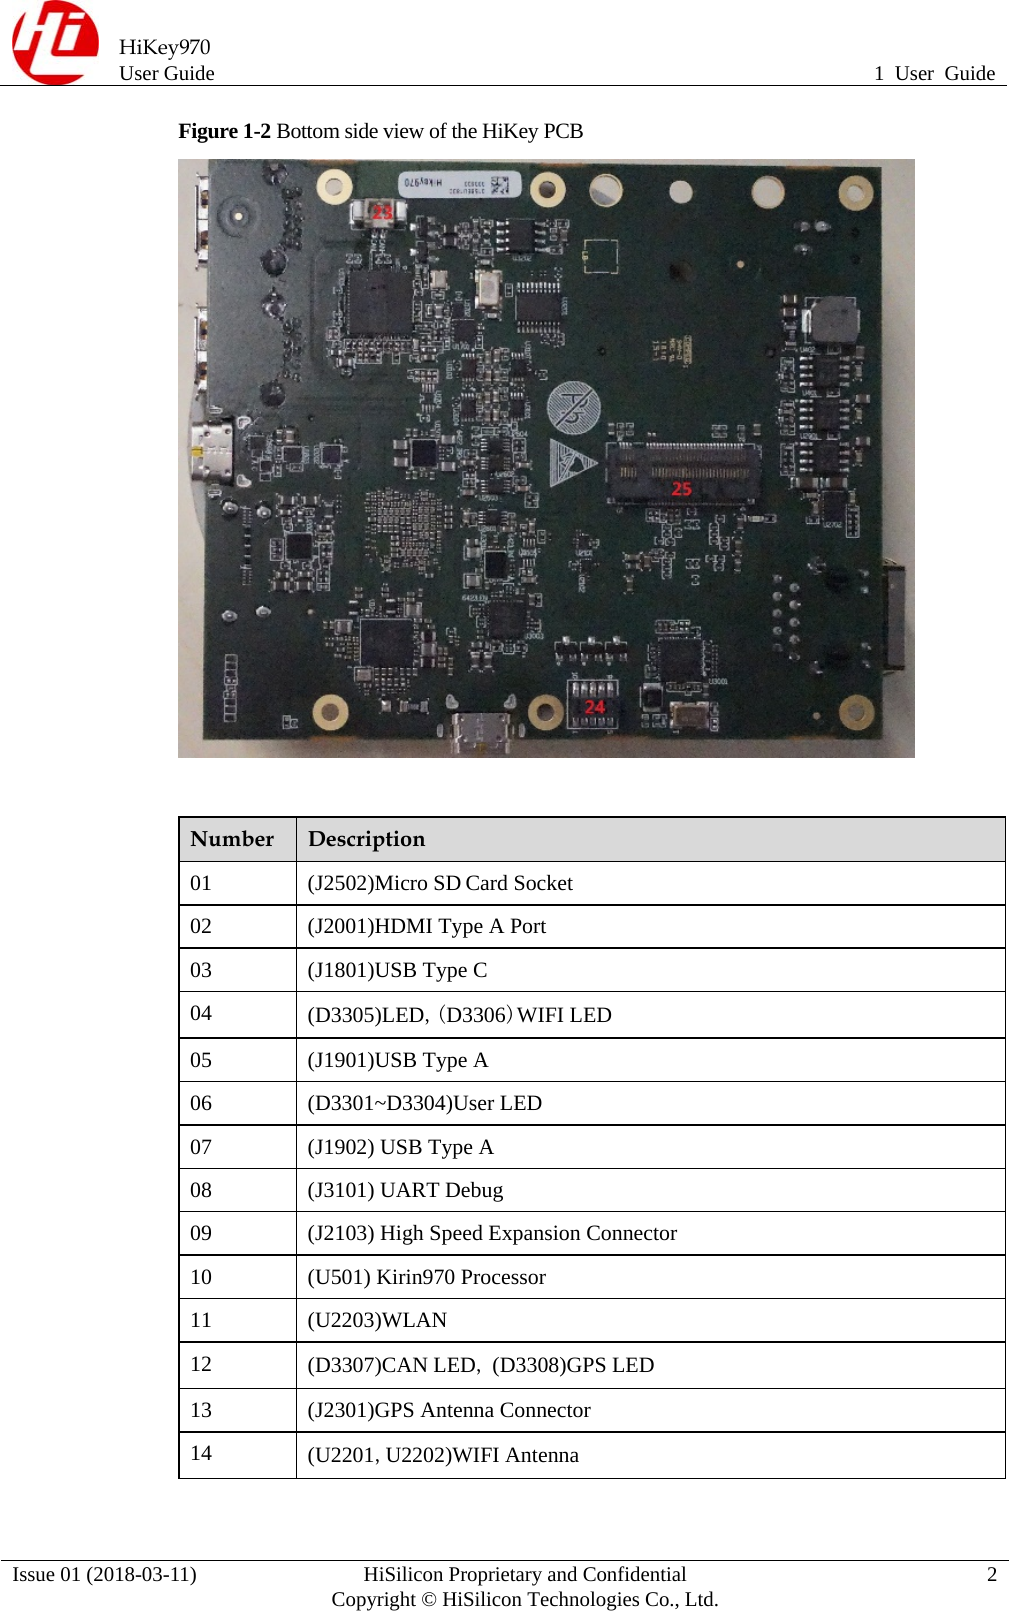  HiKey970 User Guide  1 User Guide Issue 01 (2018-03-11)  HiSilicon Proprietary and Confidential          Copyright © HiSilicon Technologies Co., Ltd.  2 Figure 1-2 Bottom side view of the HiKey PCB   Number  Description 01 (J2502)Micro SD Card Socket 02  (J2001)HDMI Type A Port 03  (J1801)USB Type C 04  (D3305)LED,(D3306)WIFI LED 05  (J1901)USB Type A 06 (D3301~D3304)User LED 07  (J1902) USB Type A 08  (J3101) UART Debug 09  (J2103) High Speed Expansion Connector 10  (U501) Kirin970 Processor 11 (U2203)WLAN 12  (D3307)CAN LED, (D3308)GPS LED 13 (J2301)GPS Antenna Connector 14  (U2201,U2202)WIFI Antenna 